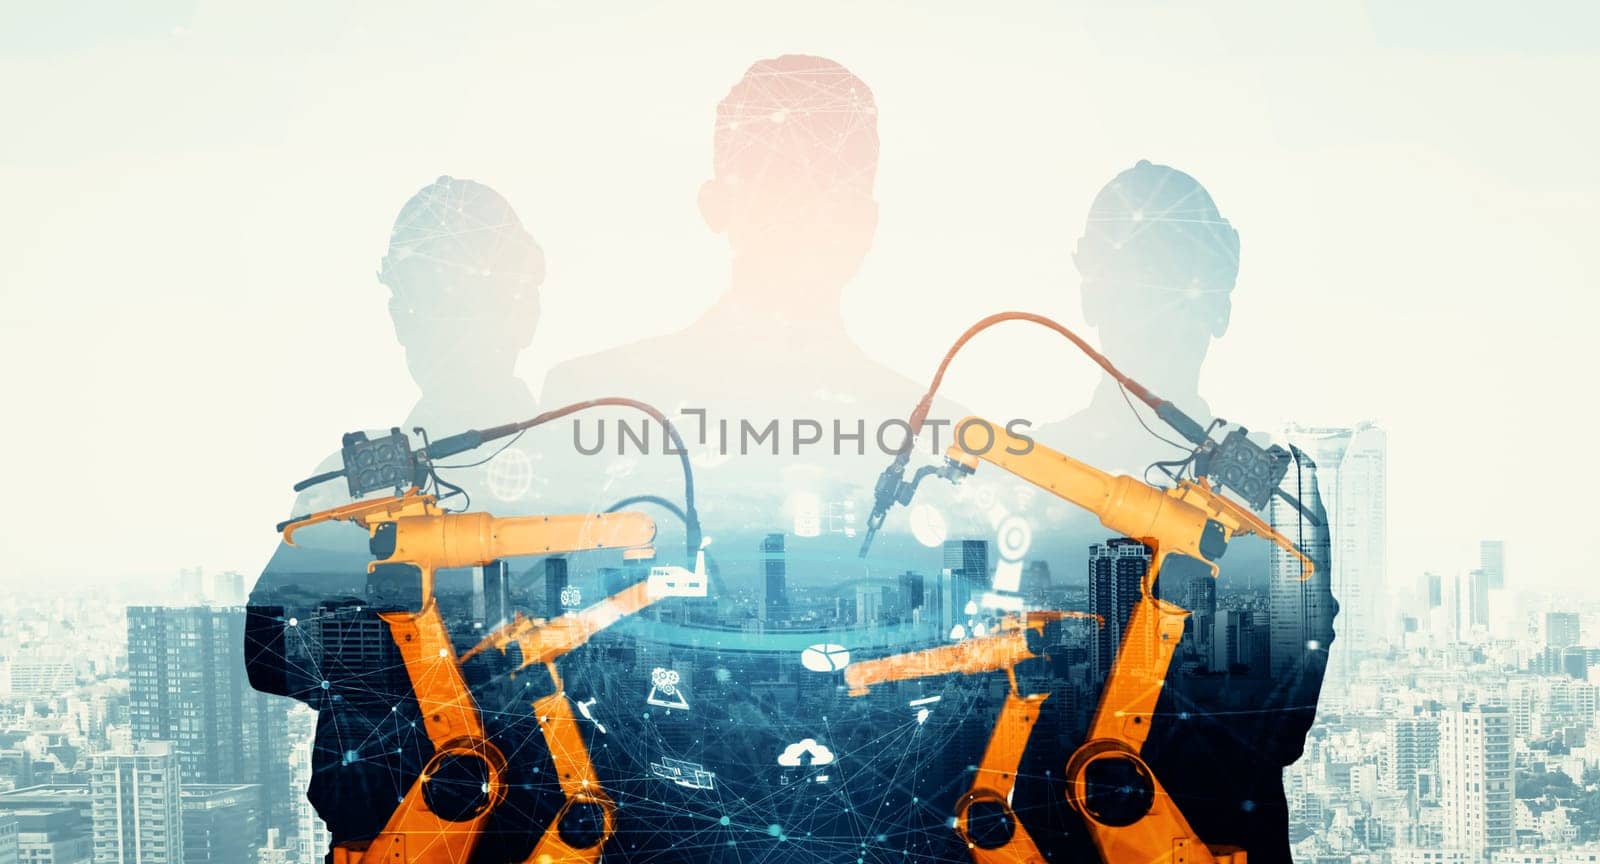 XAI Mechanized industry robot arm and factory worker double exposure by biancoblue